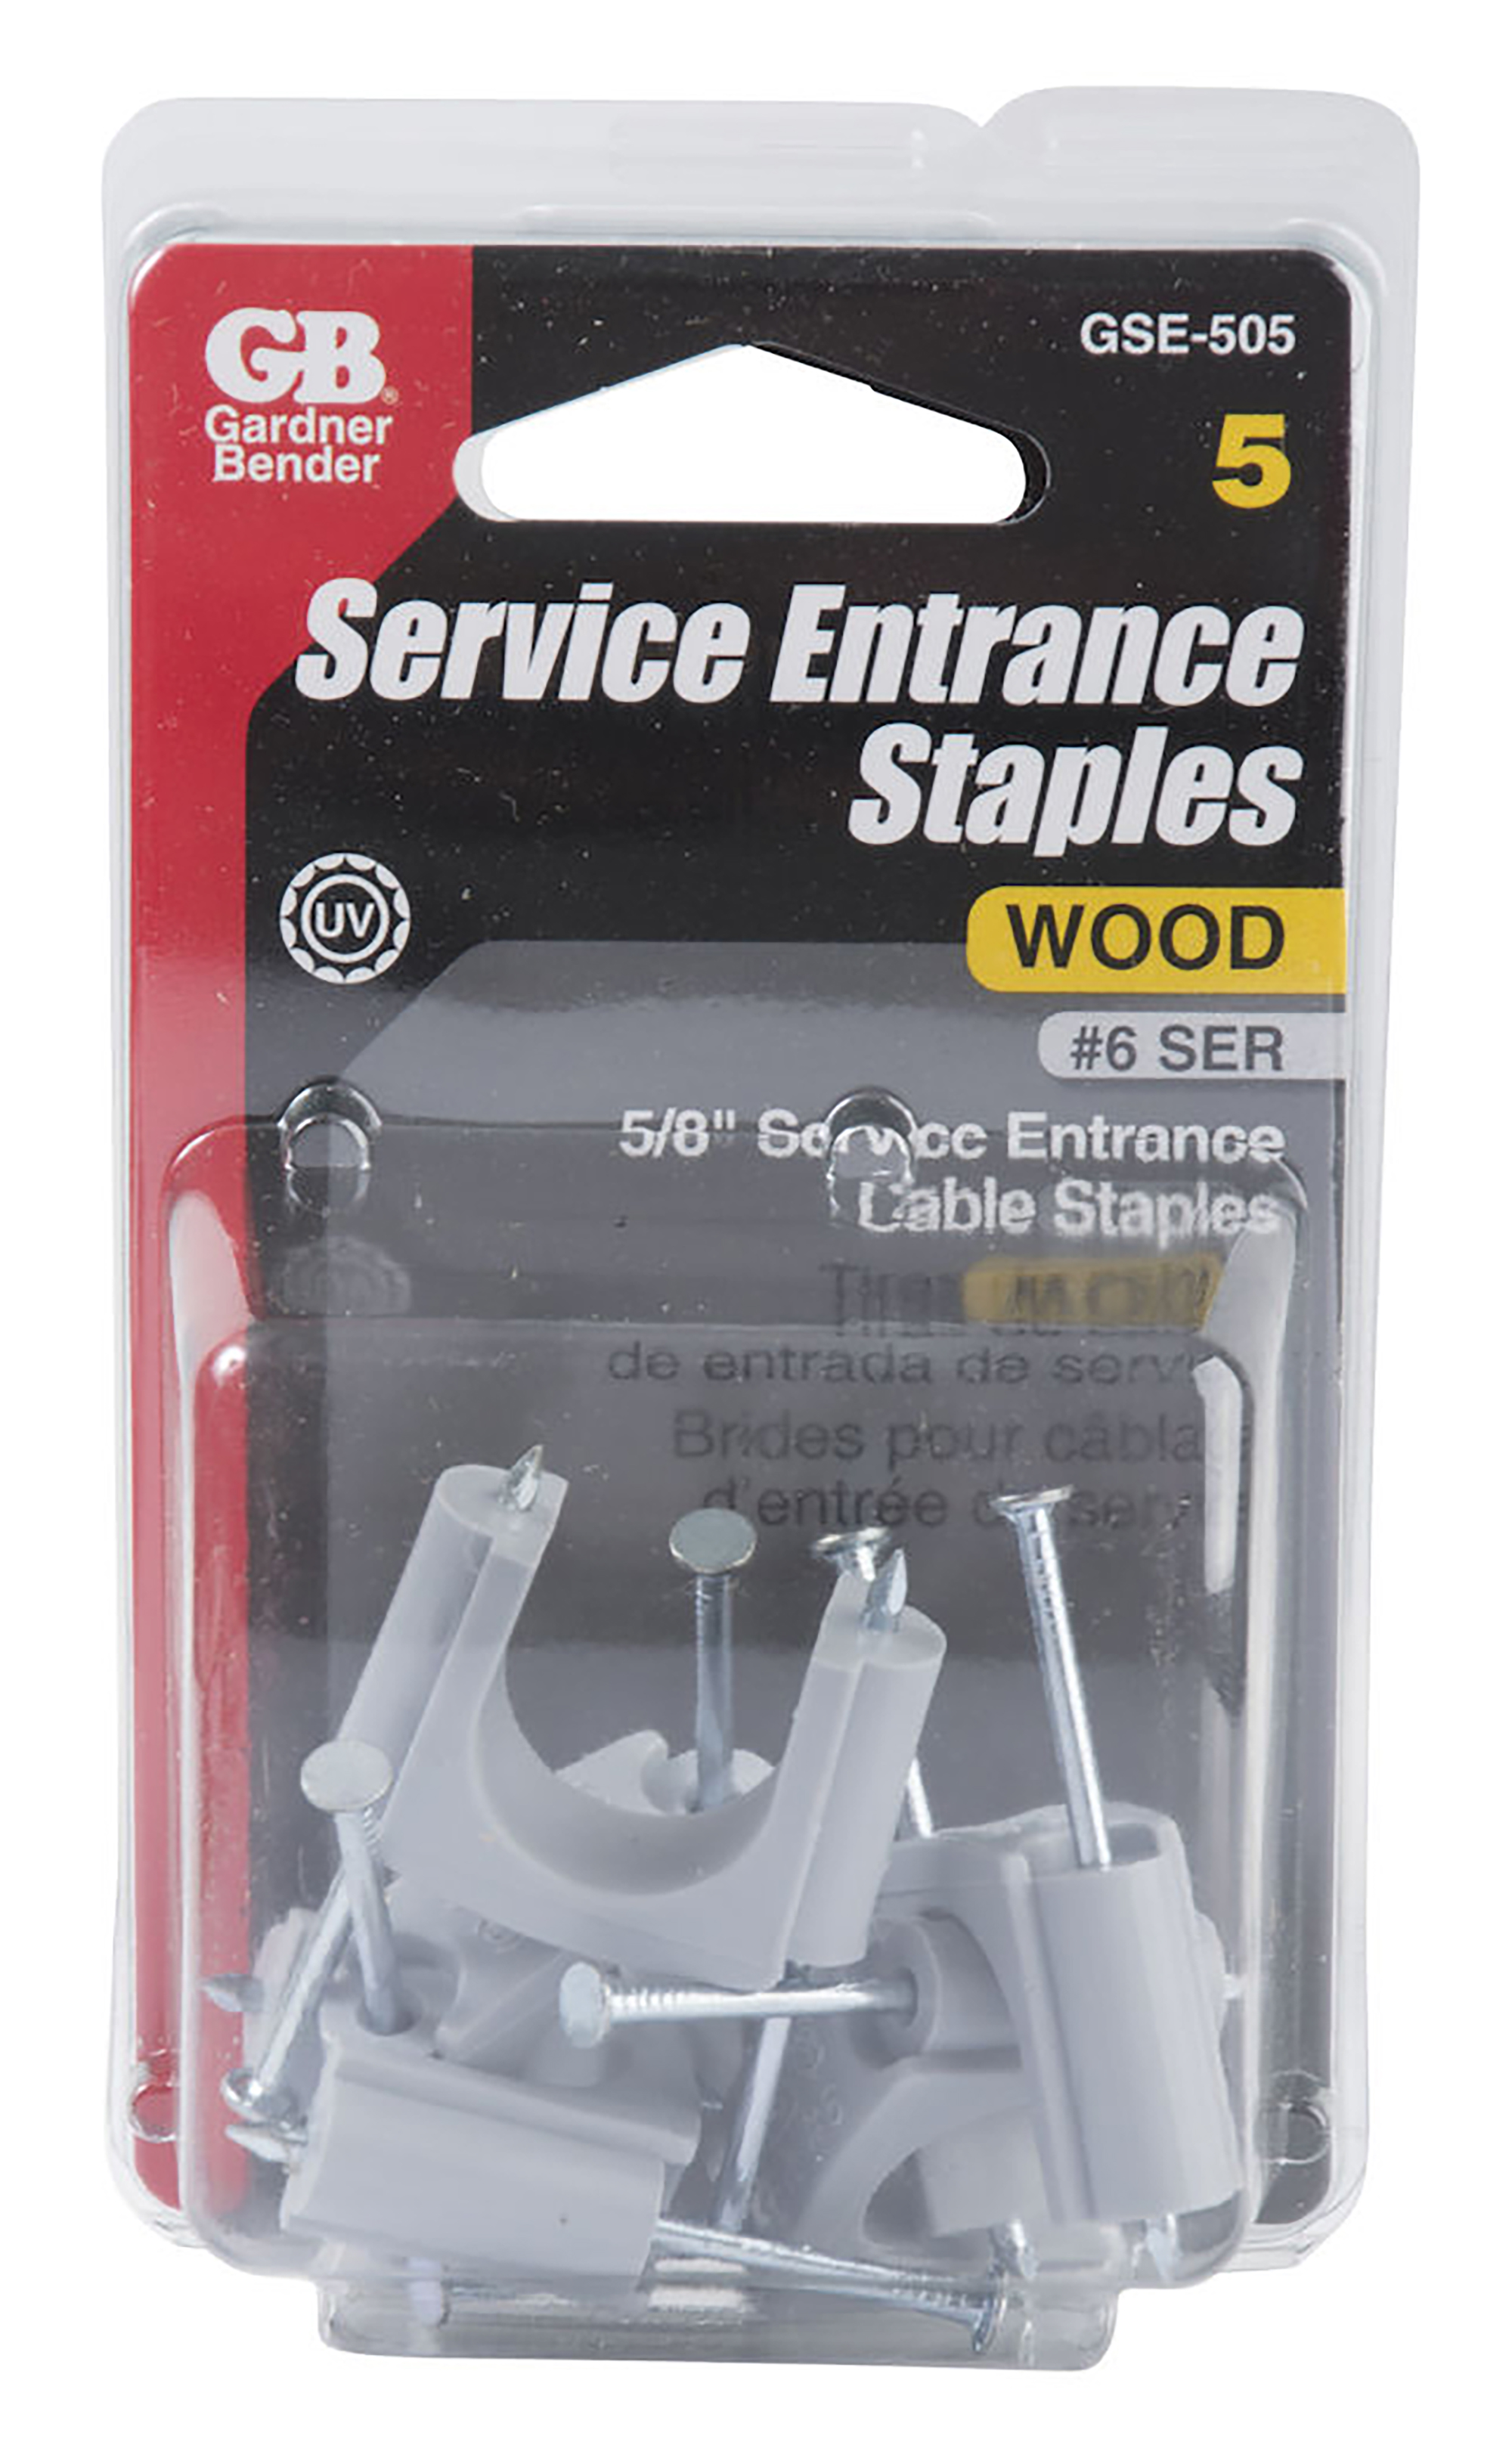 Pair/Lot of 2 5 Packs GB GSE-505 5/8" Service Entrance Staples #6 SER 10 Total 